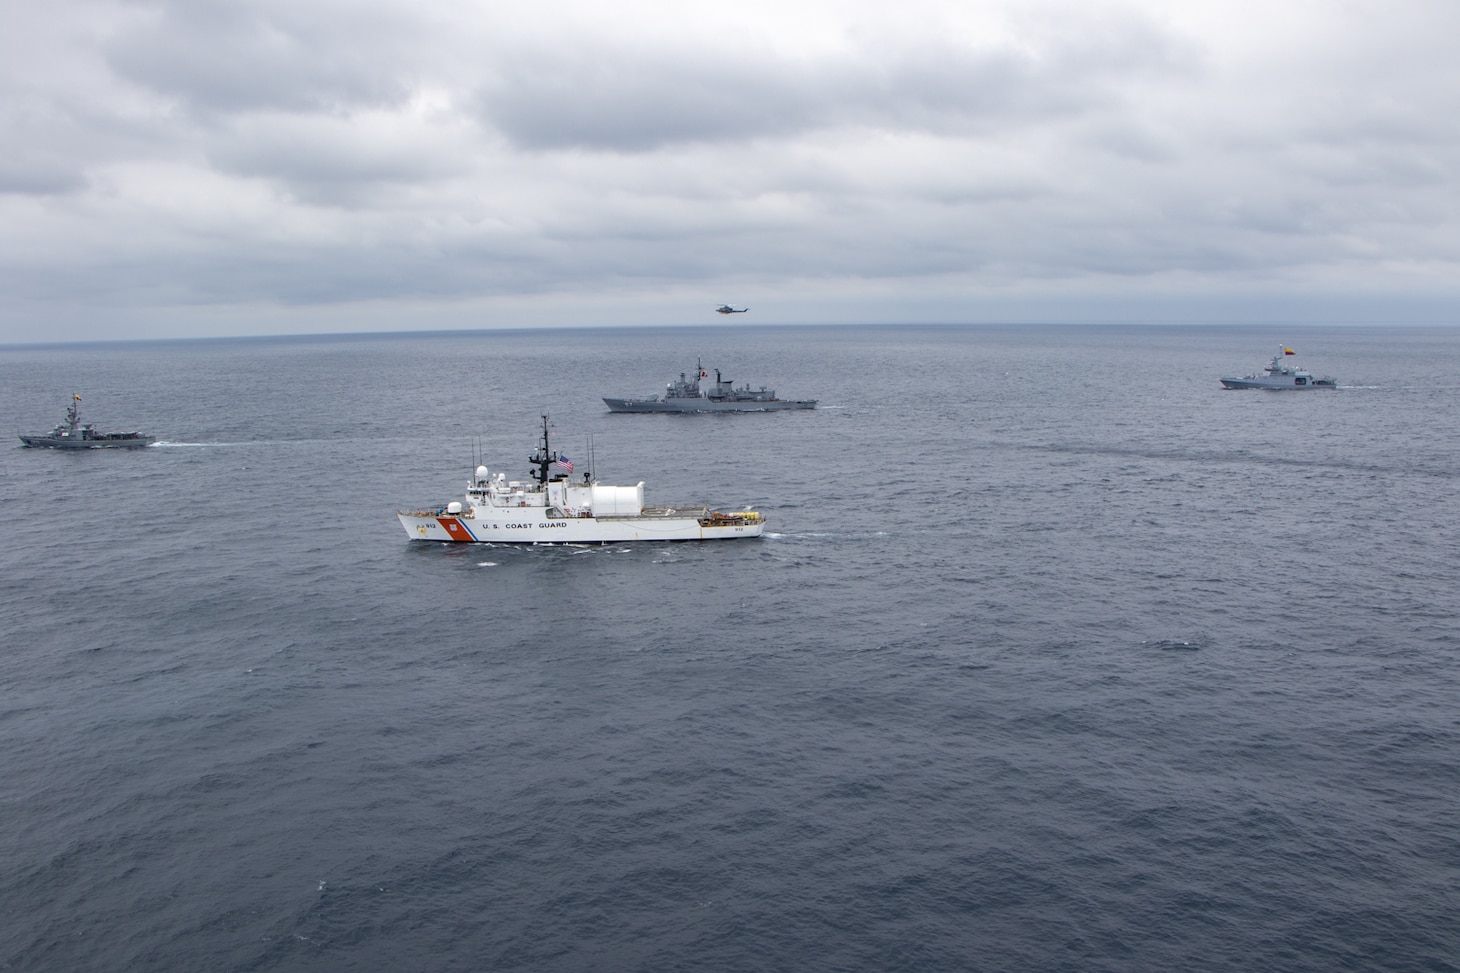 Naval ships from Ecuador, Chile, Colombia, Peru and the U.S. conduct naval formations during a training exercise for UNITAS LXI off the coast of Ecuador, Nov. 7, 2020.  xa